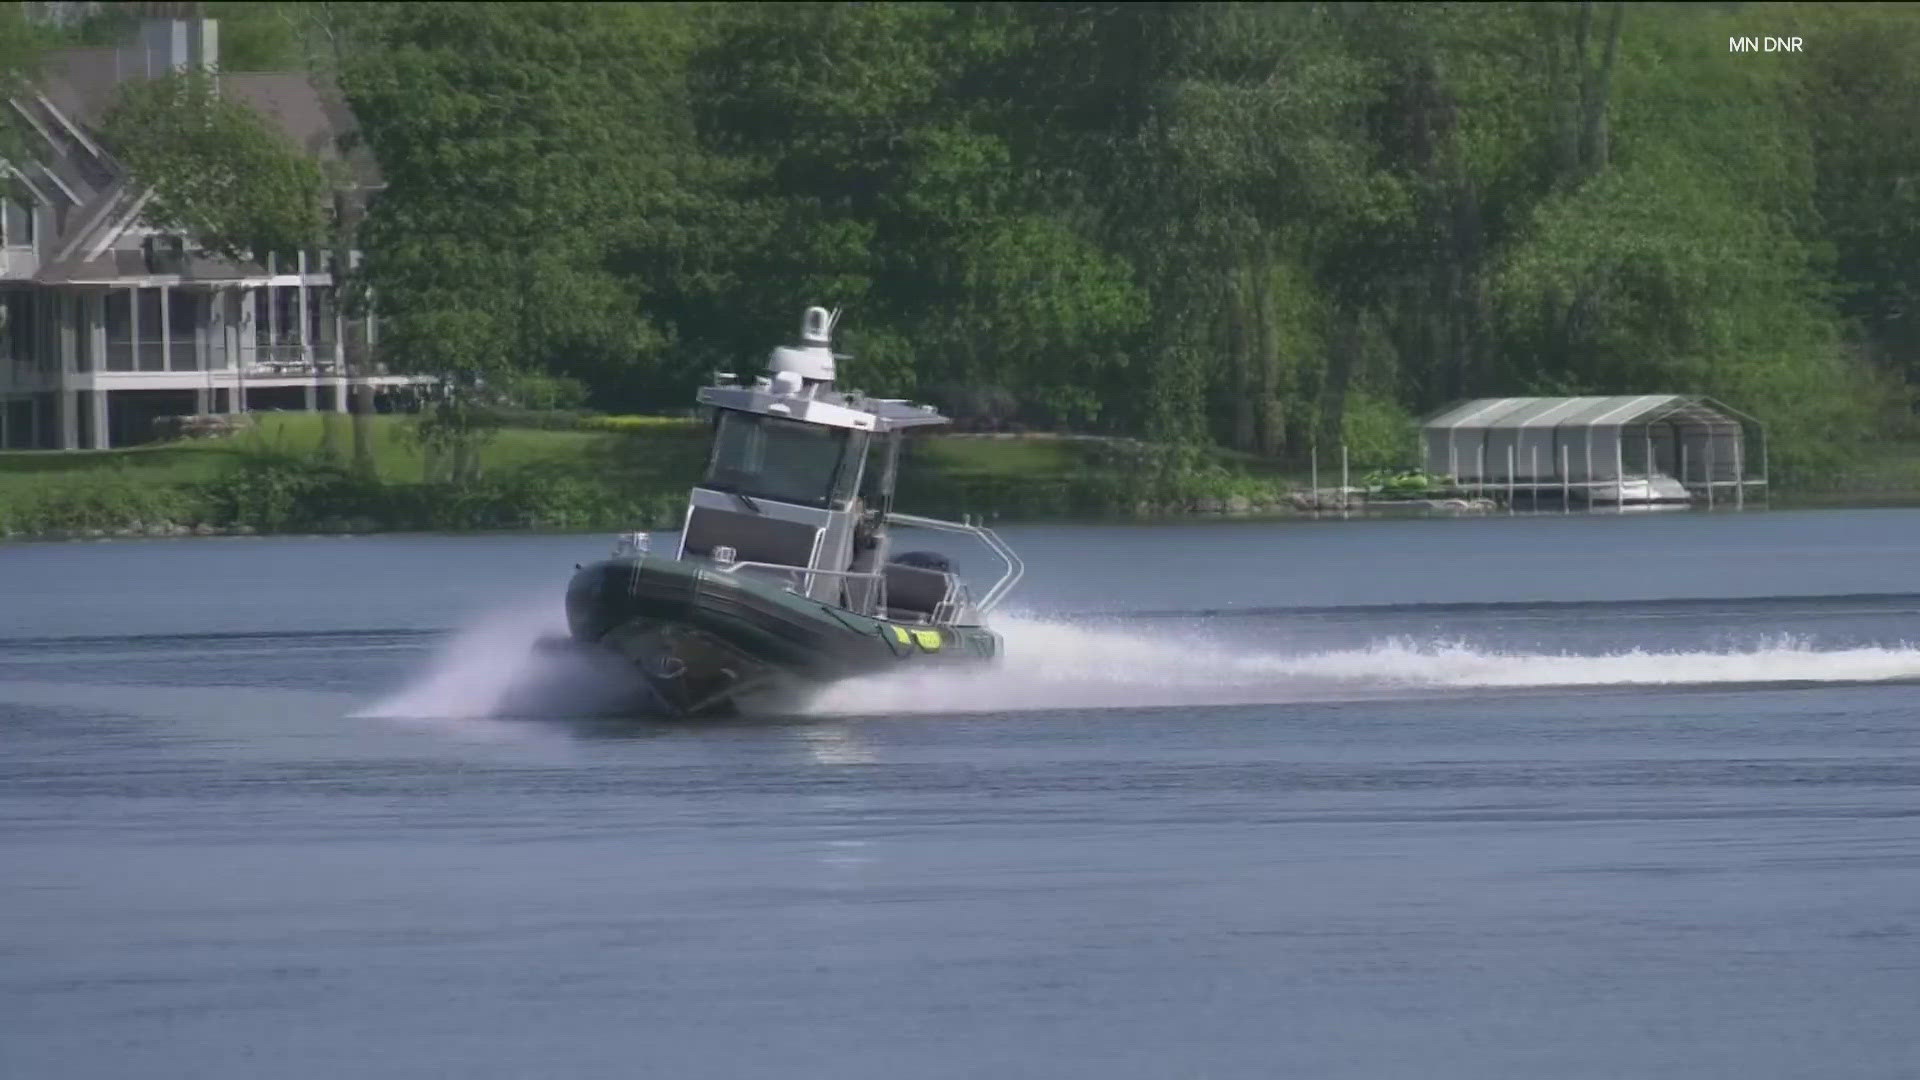 In alliance with Memorial Day weekend, the DNR's Enforcement Division announced the formation of its new Marine Unit dedicated to monitoring safety on waterways.